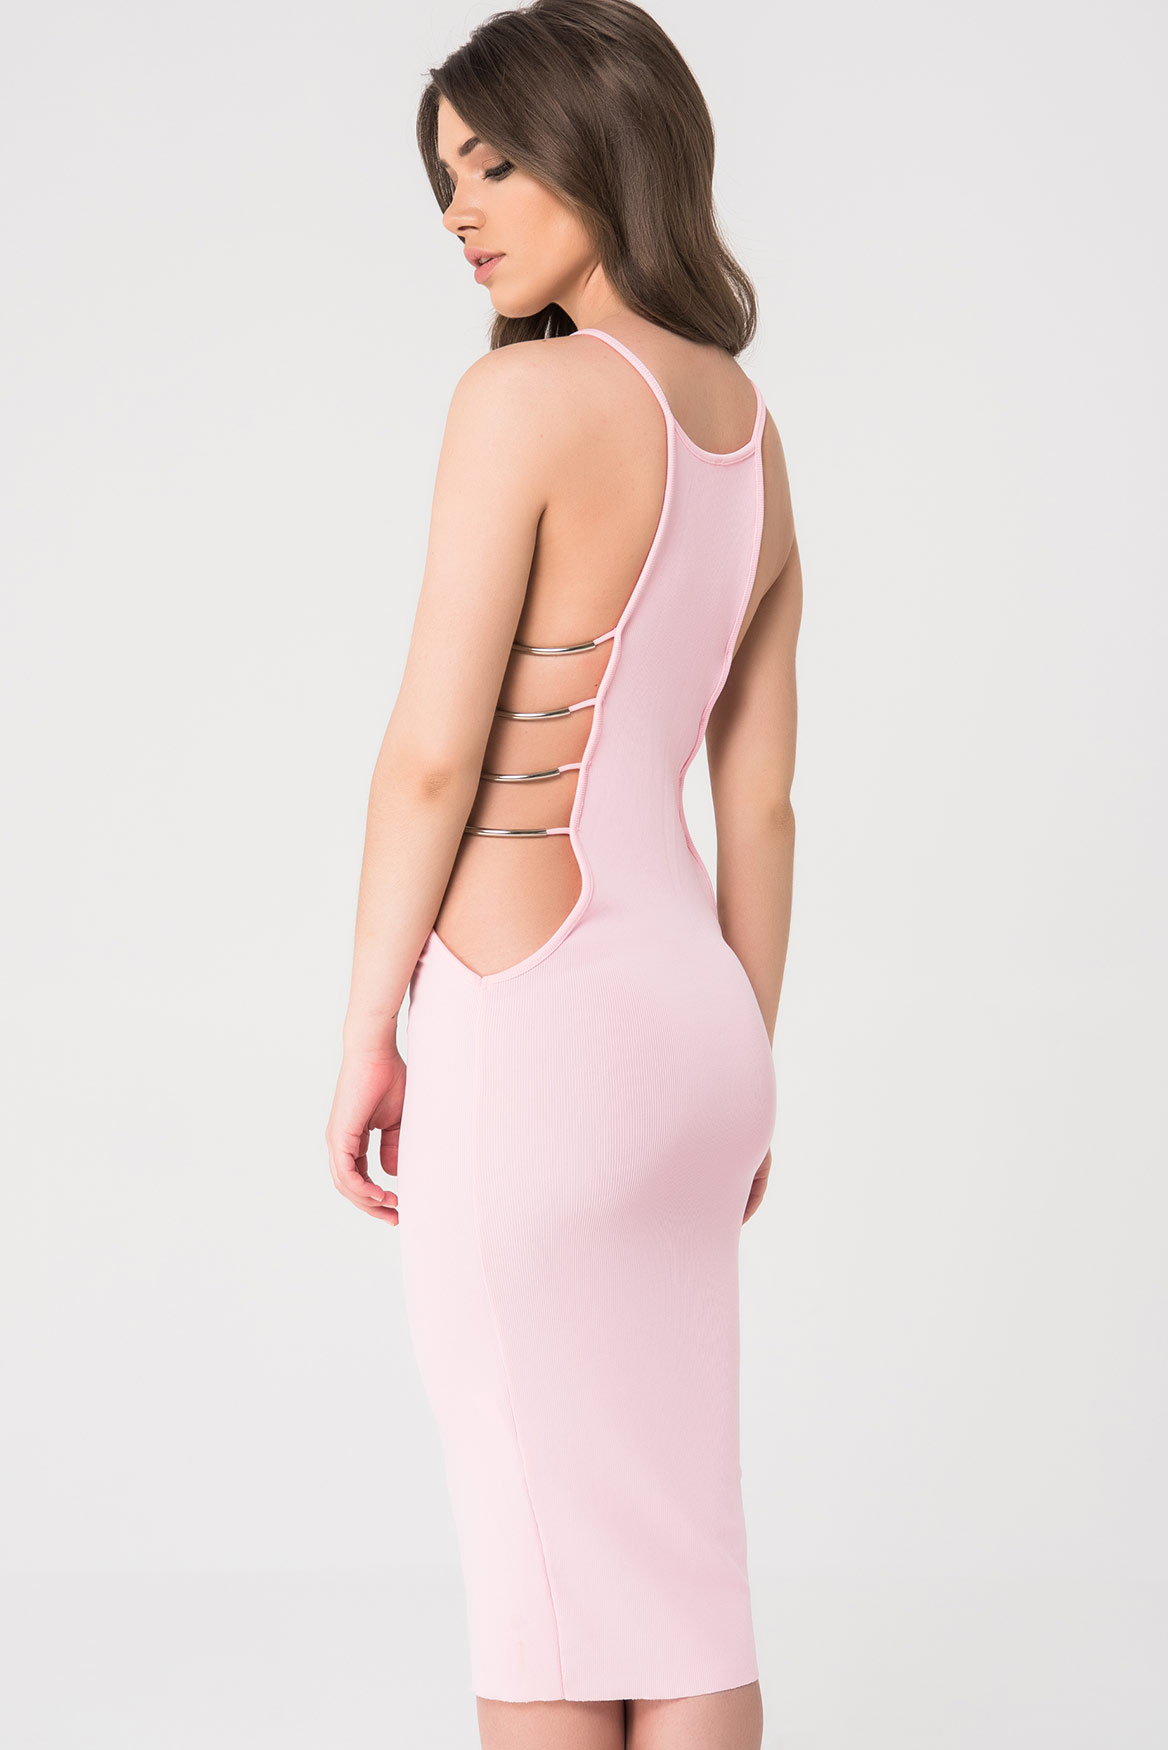 Wholesale Ladder Cut Out Pink Cami Dress